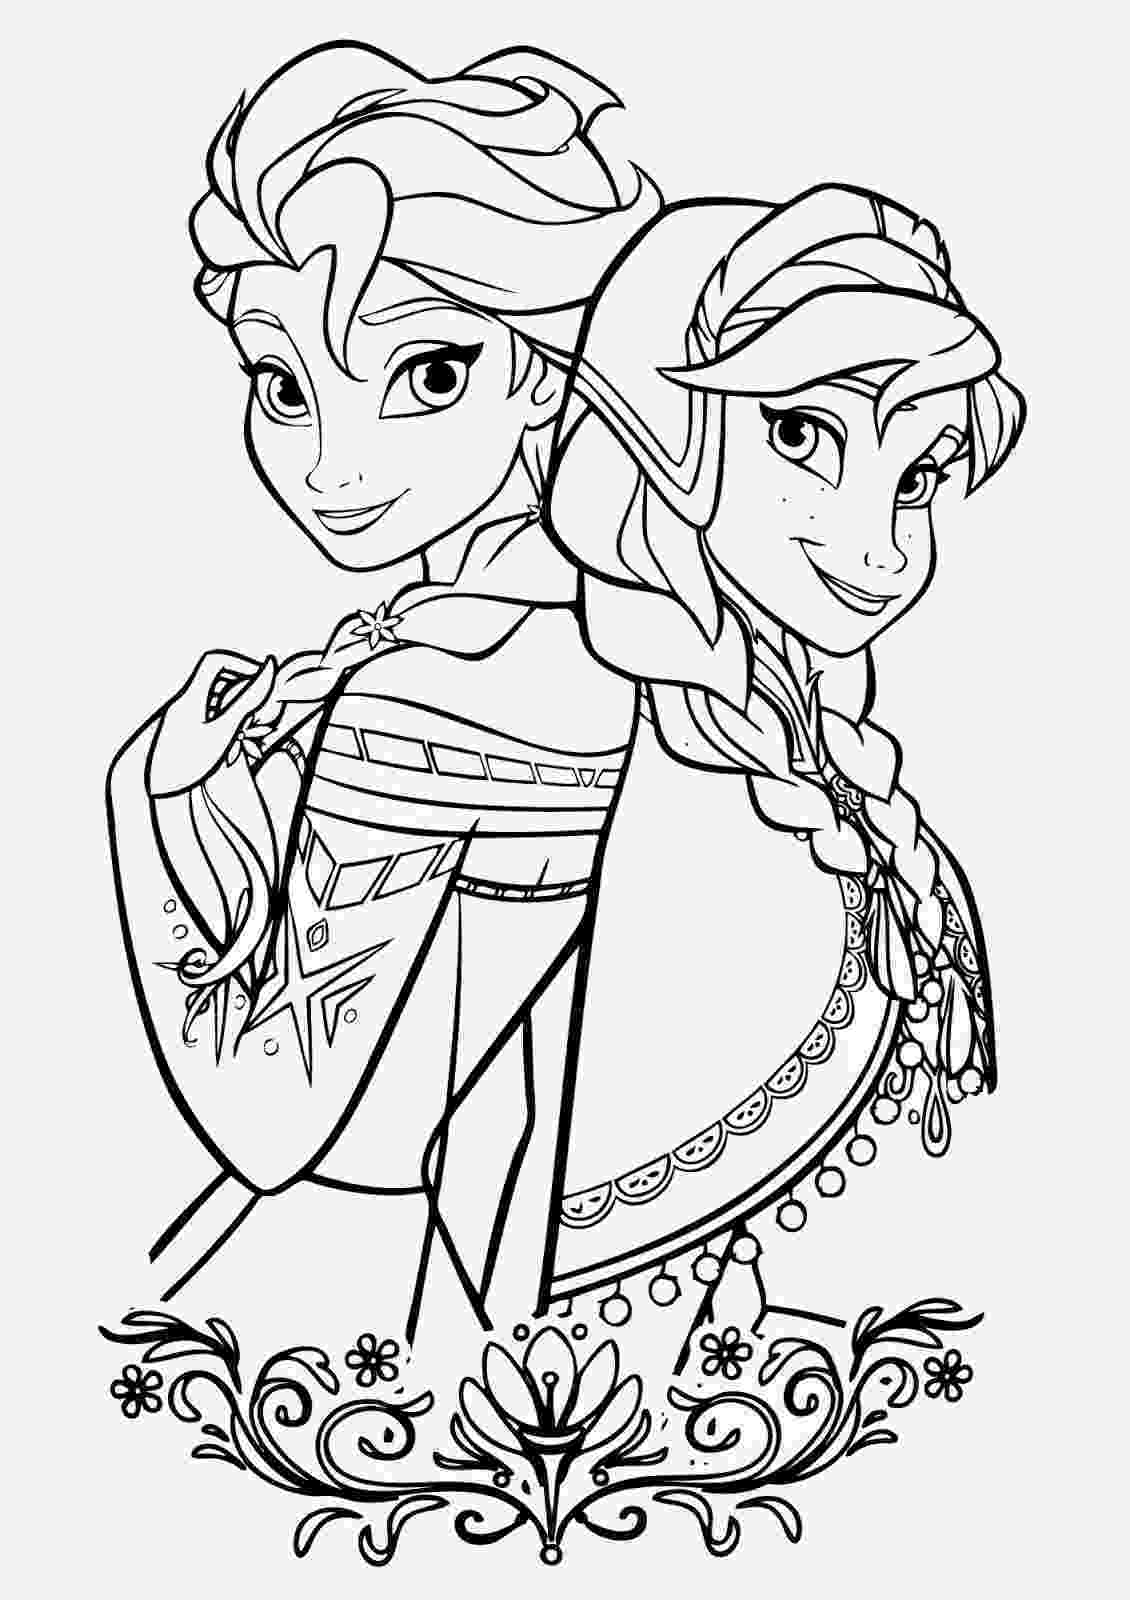 printable coloring pages of elsa from frozen free printable elsa coloring pages for kids best elsa from pages of coloring printable frozen 